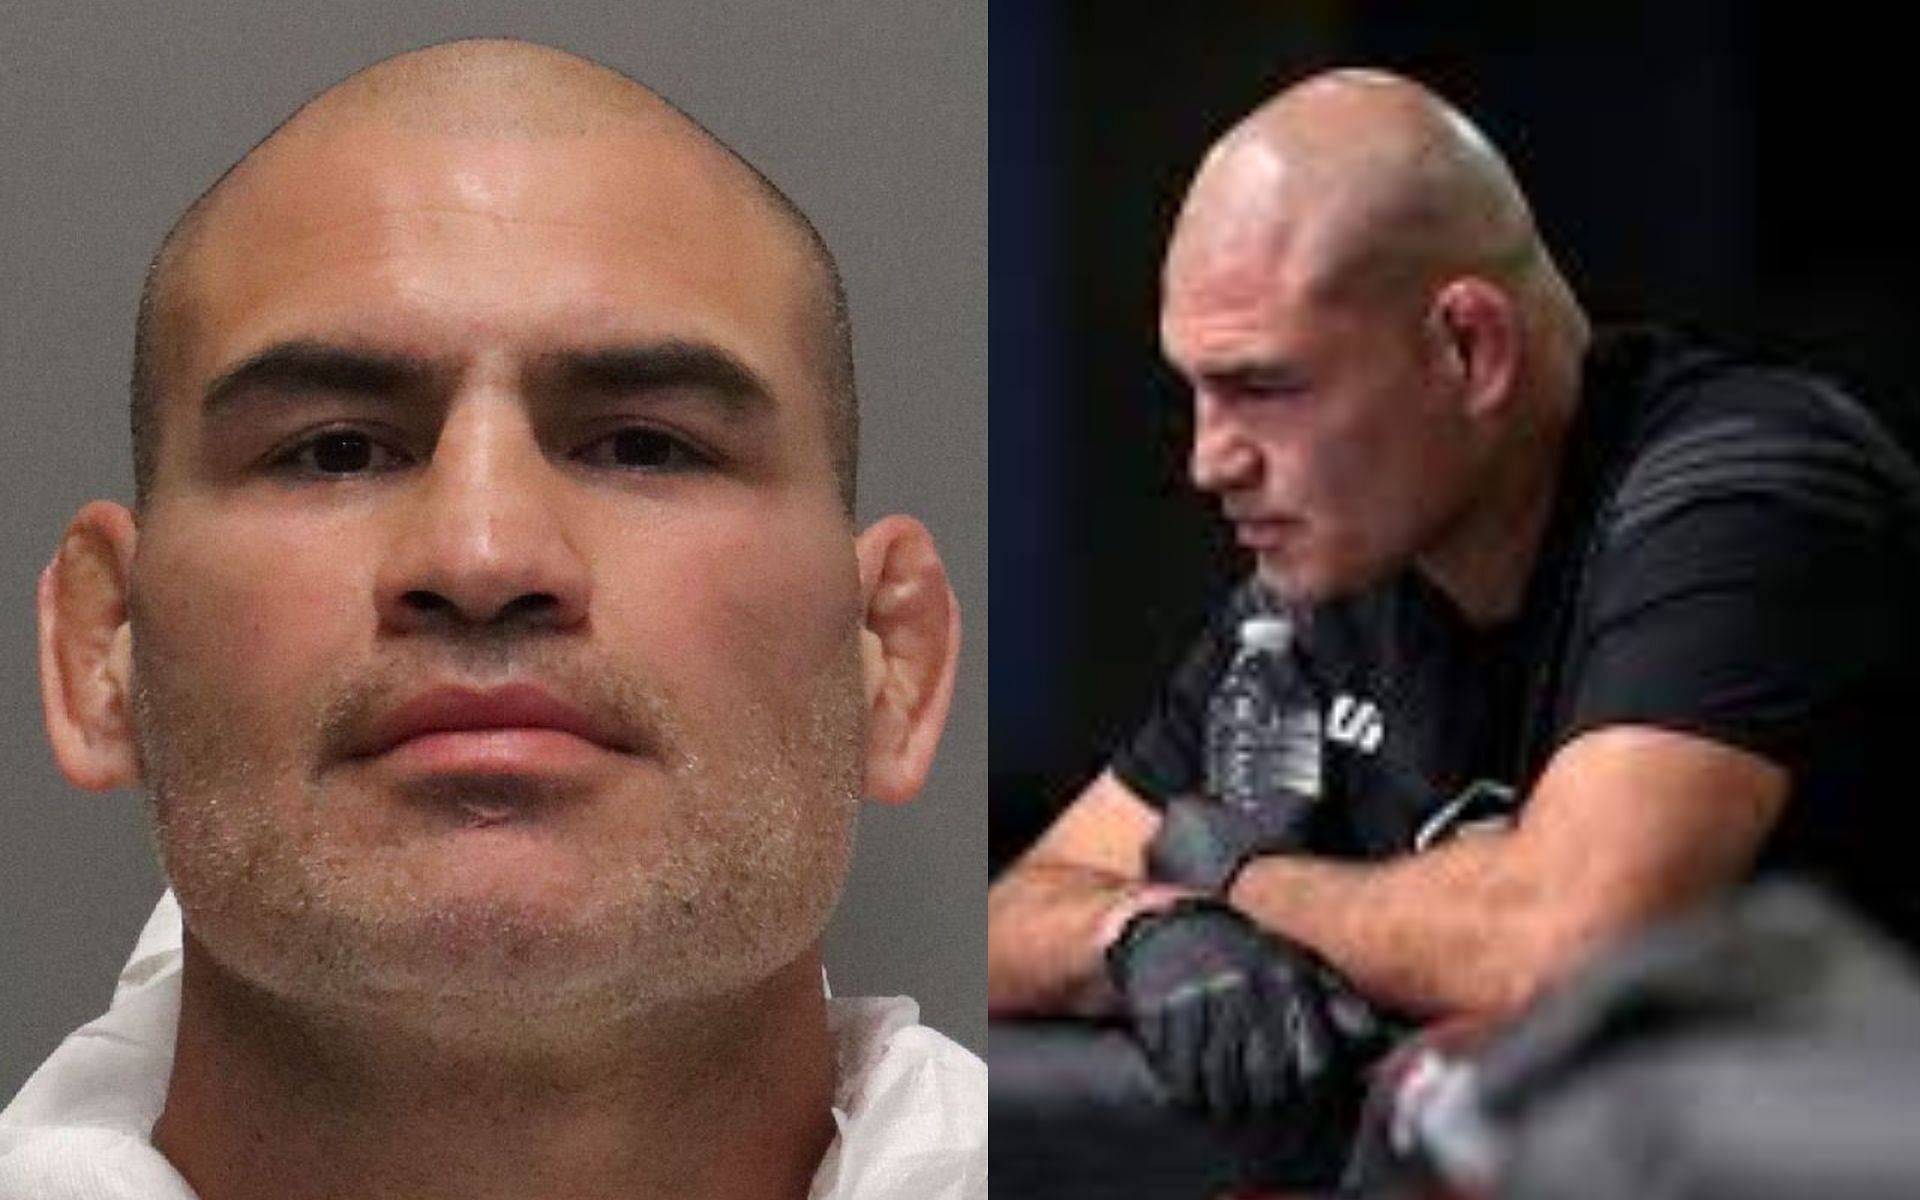 Cain Velasquez was arrested in February of this year